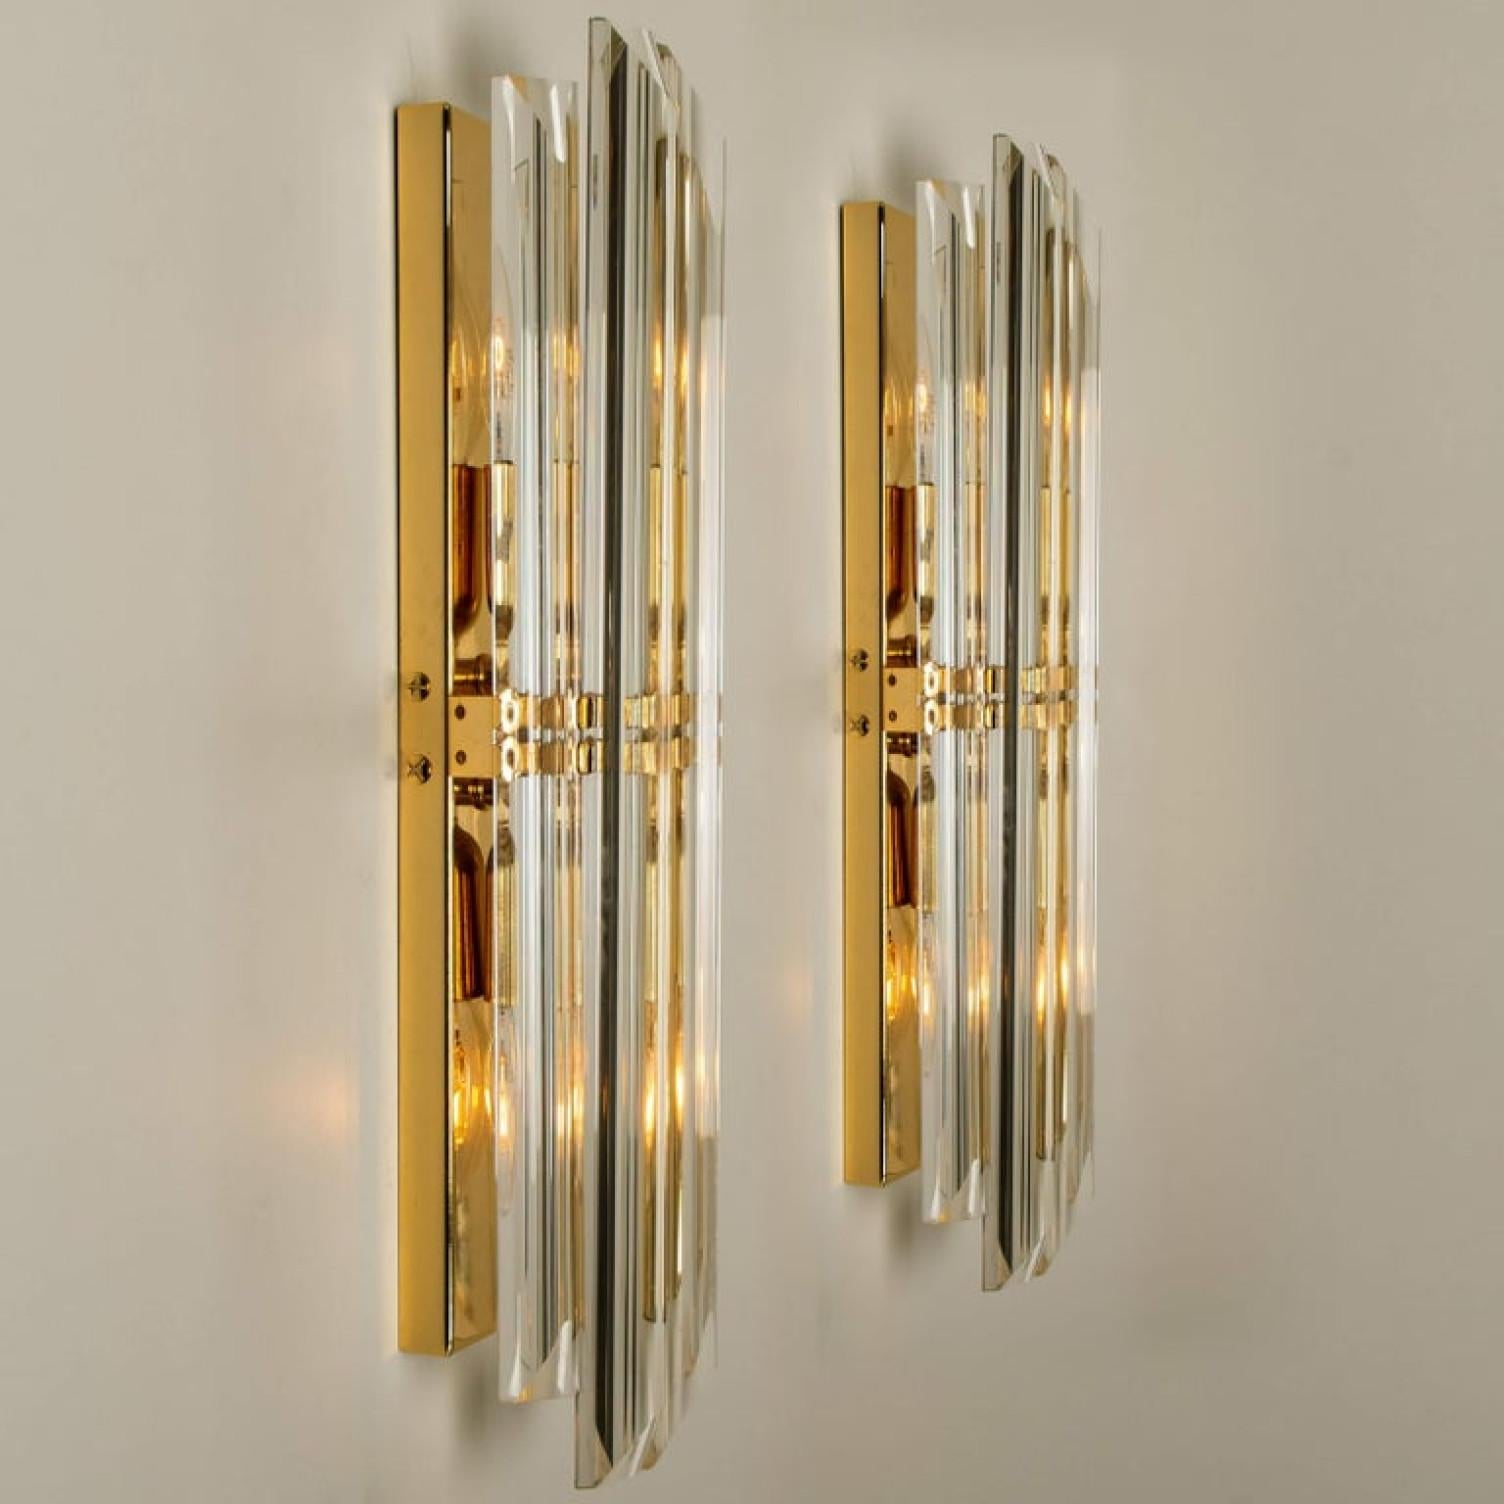 Set of Murano wall sconces each wall sconce is featuring four crystal clear glass 